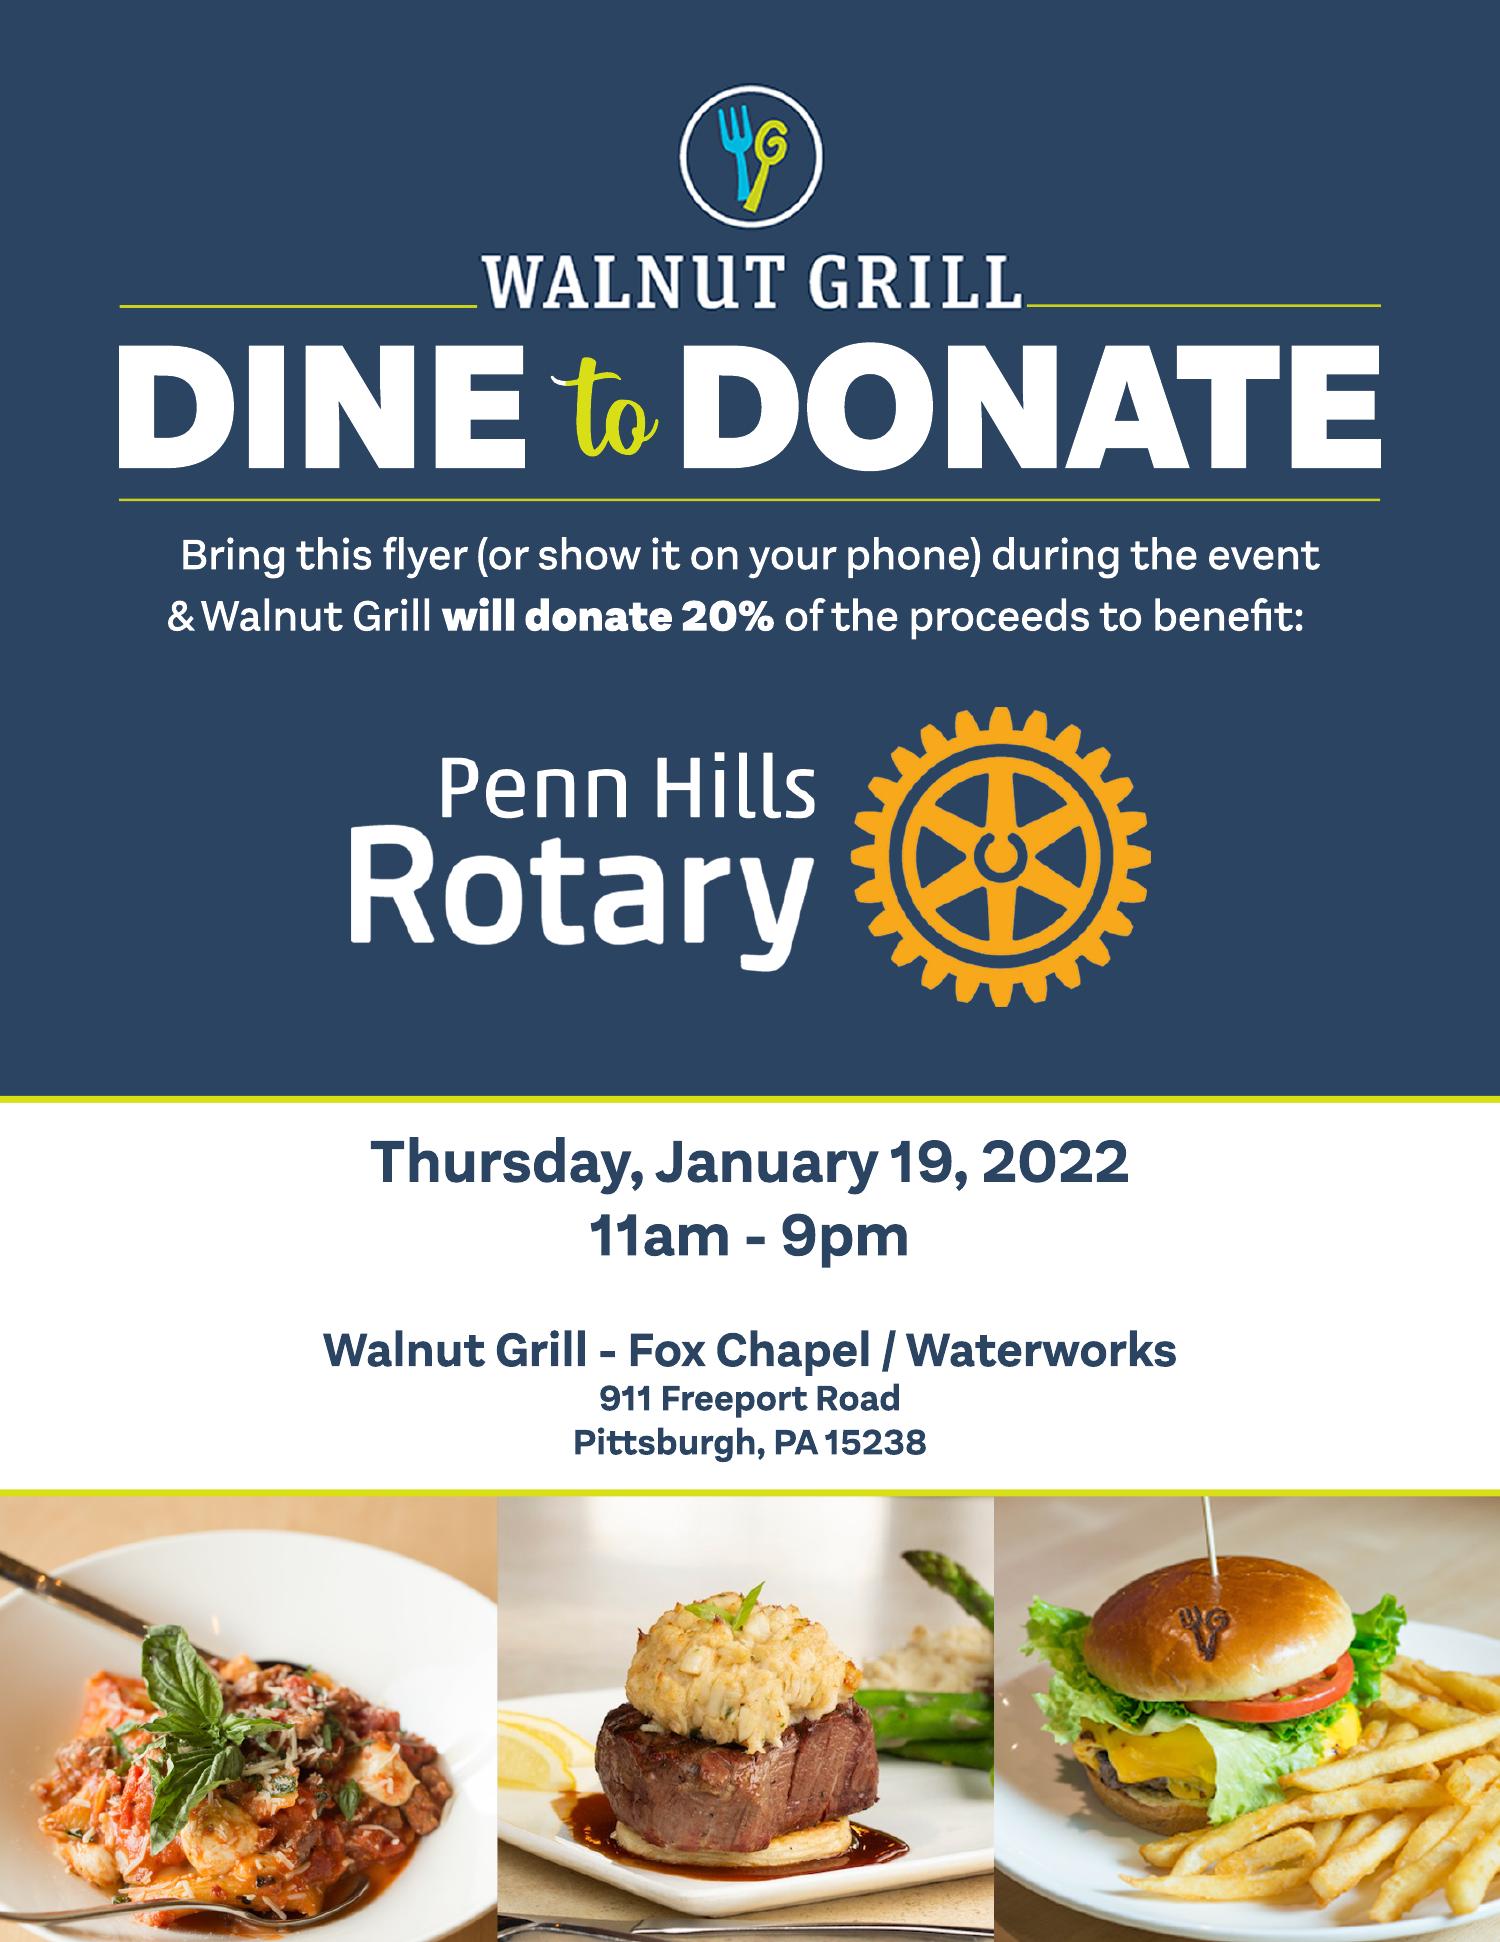 dine-to-donate-flyer-pdf-docdroid